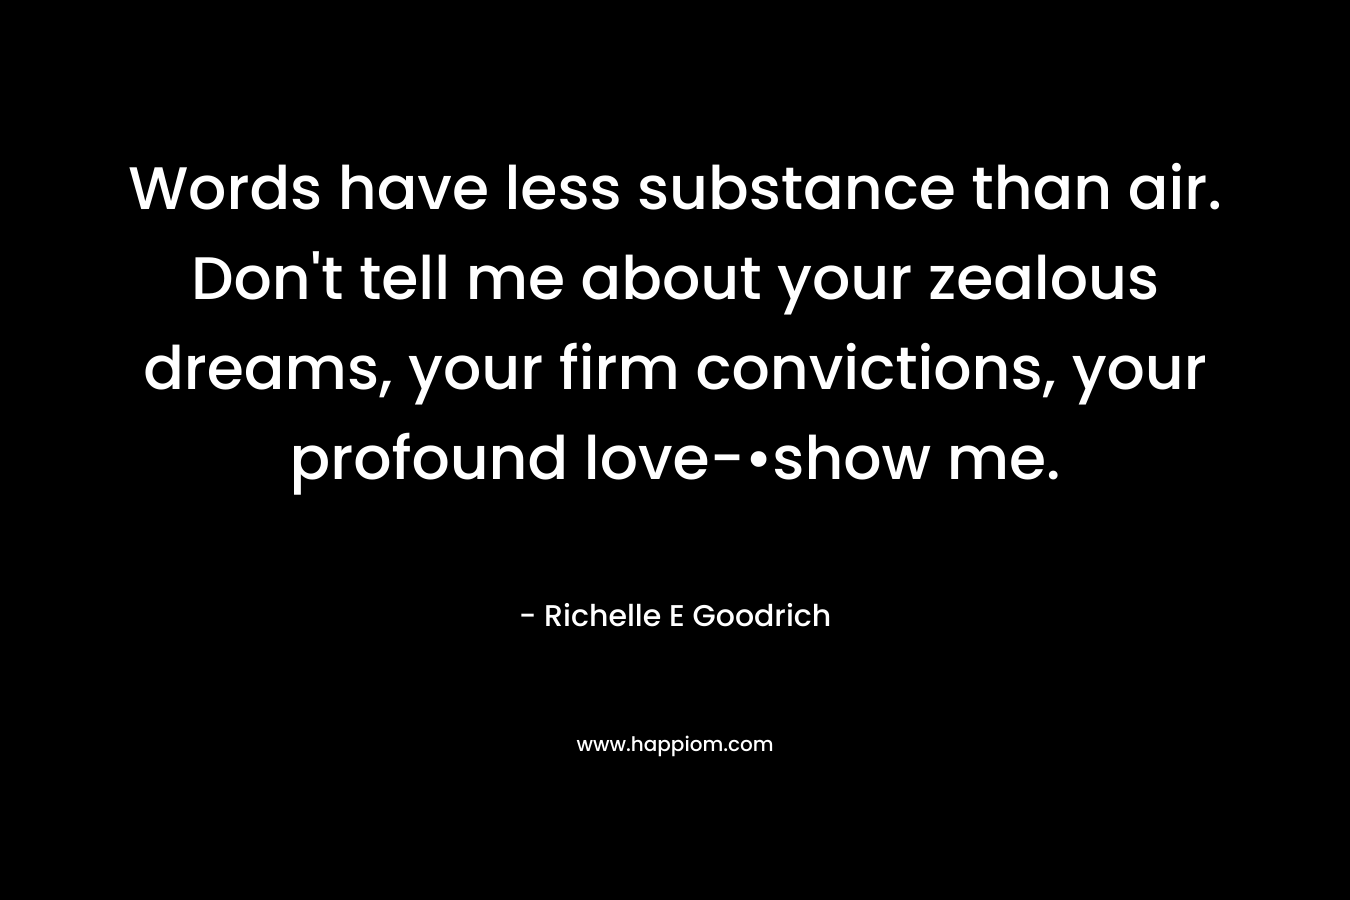 Words have less substance than air. Don’t tell me about your zealous dreams, your firm convictions, your profound love-•show me. – Richelle E Goodrich